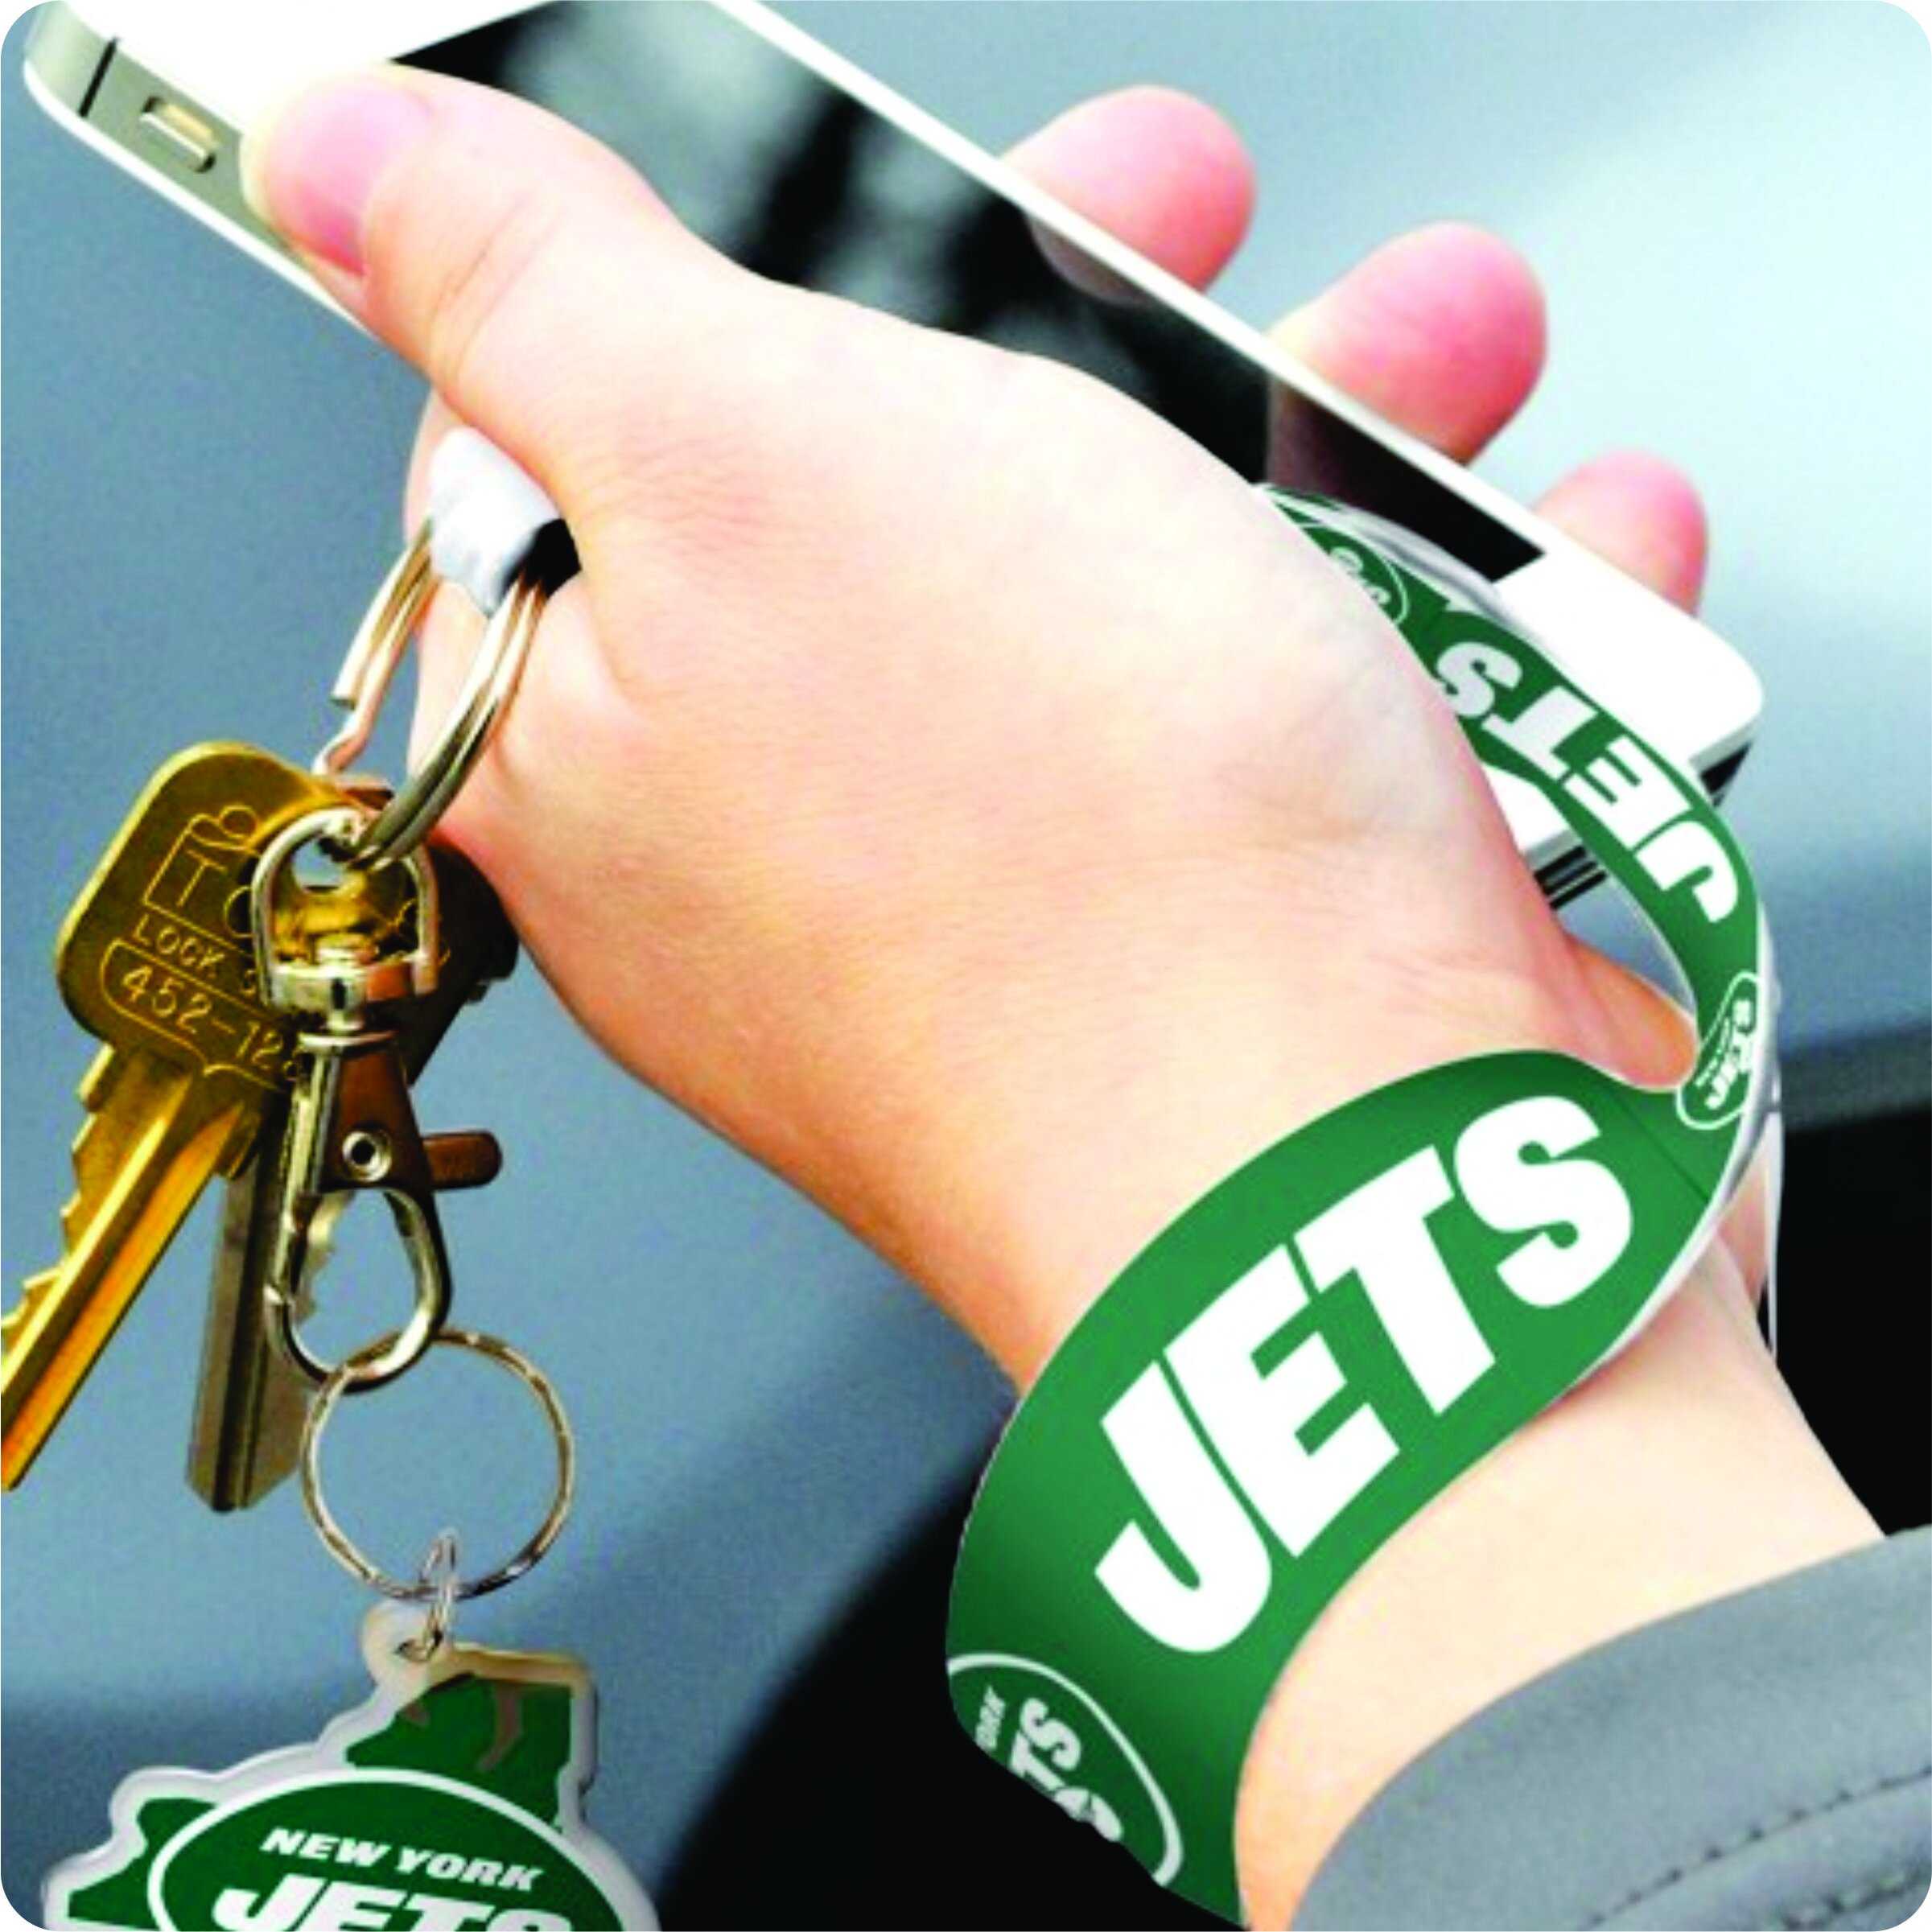 New Seattle Seahawks Team Lanyard Use For Your ID Pass Mobile Phone Or Keys. 